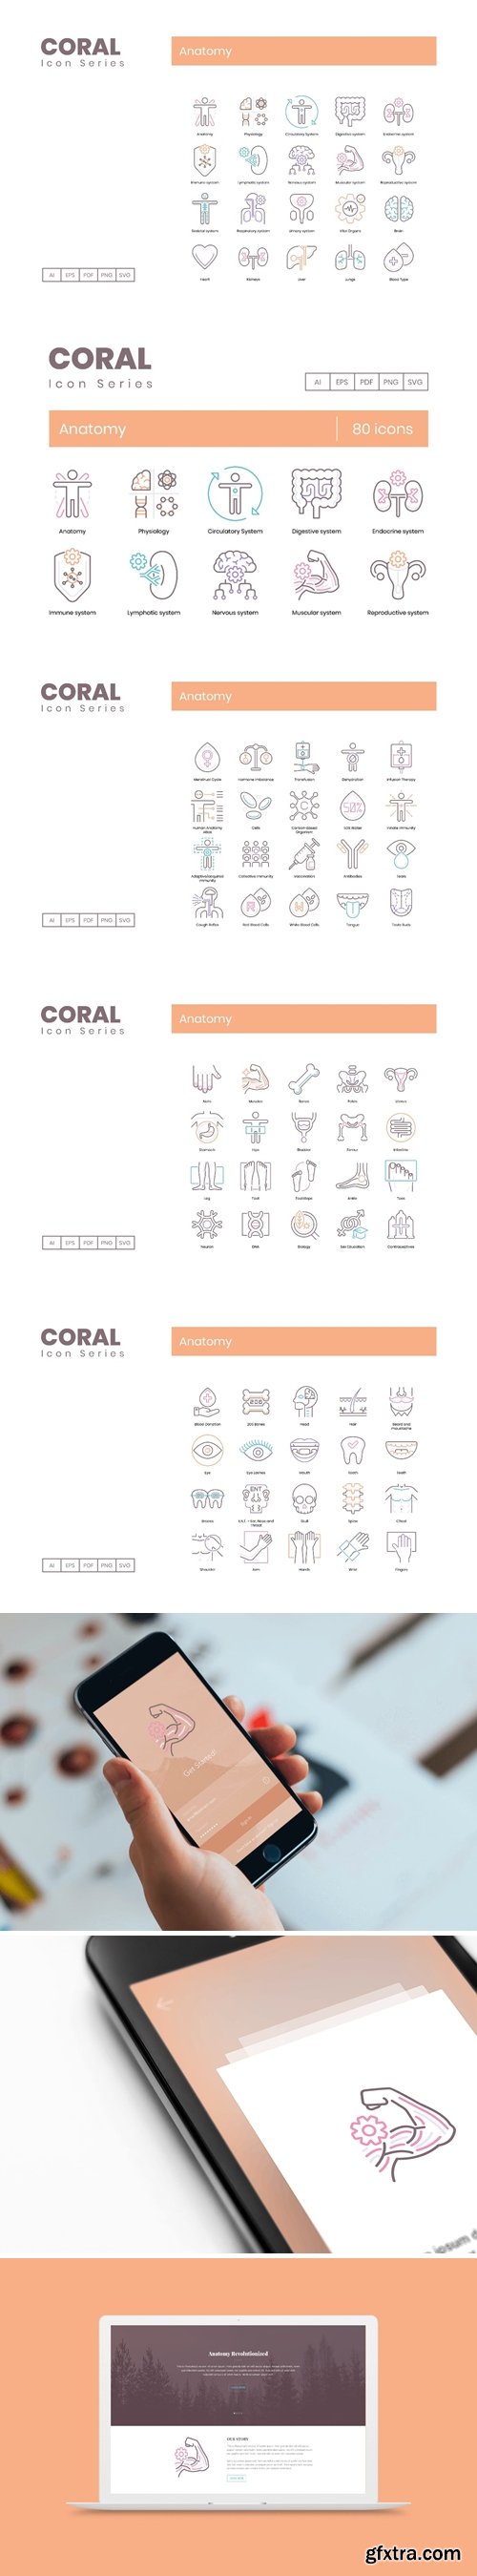 80 Anatomy Icons - Coral Series